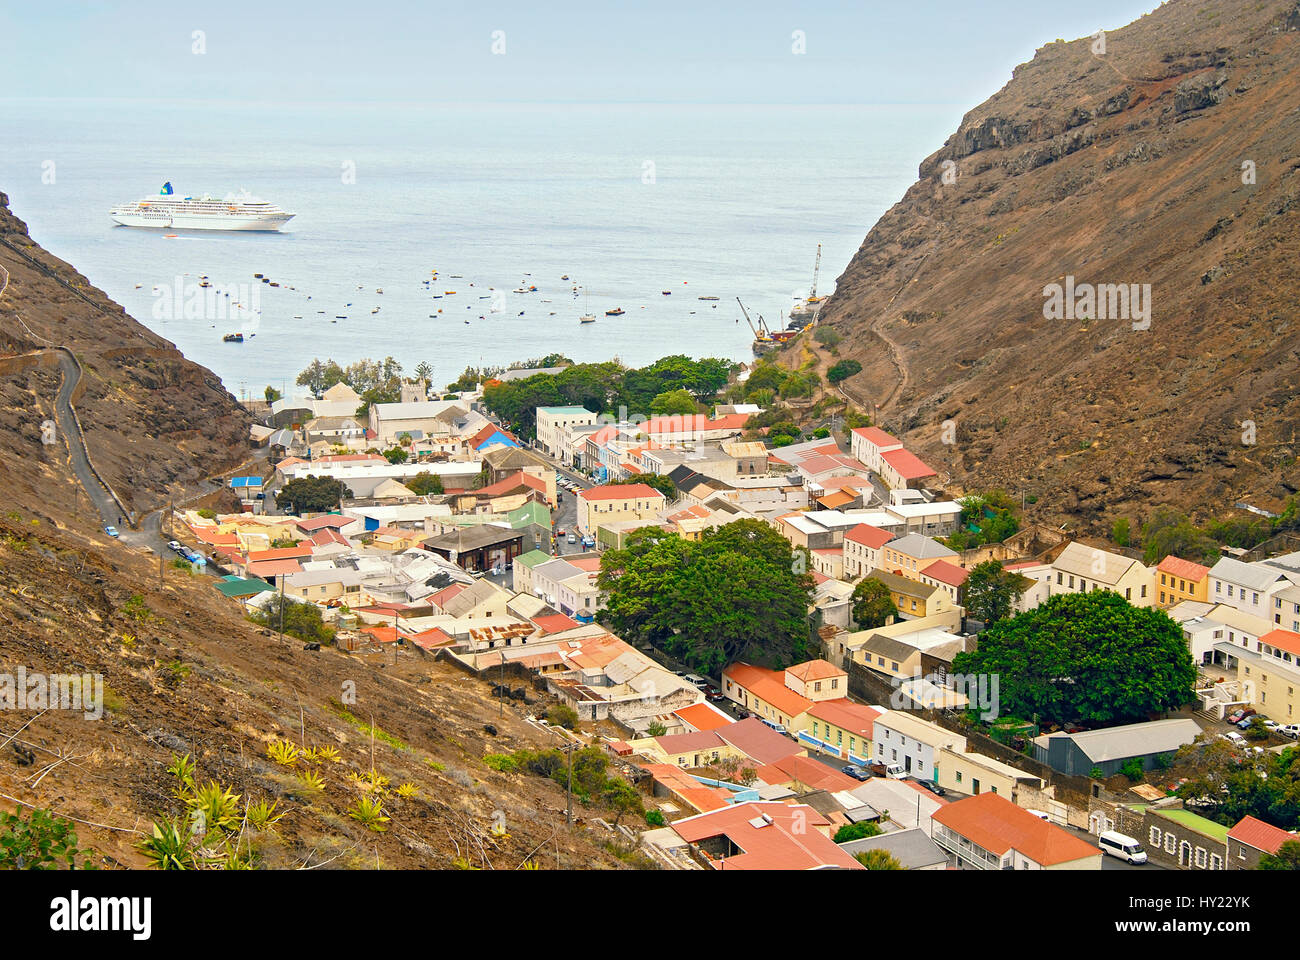 Image of Jamestown the capital St.Helena Island at the African Westcoast. Stock Photo